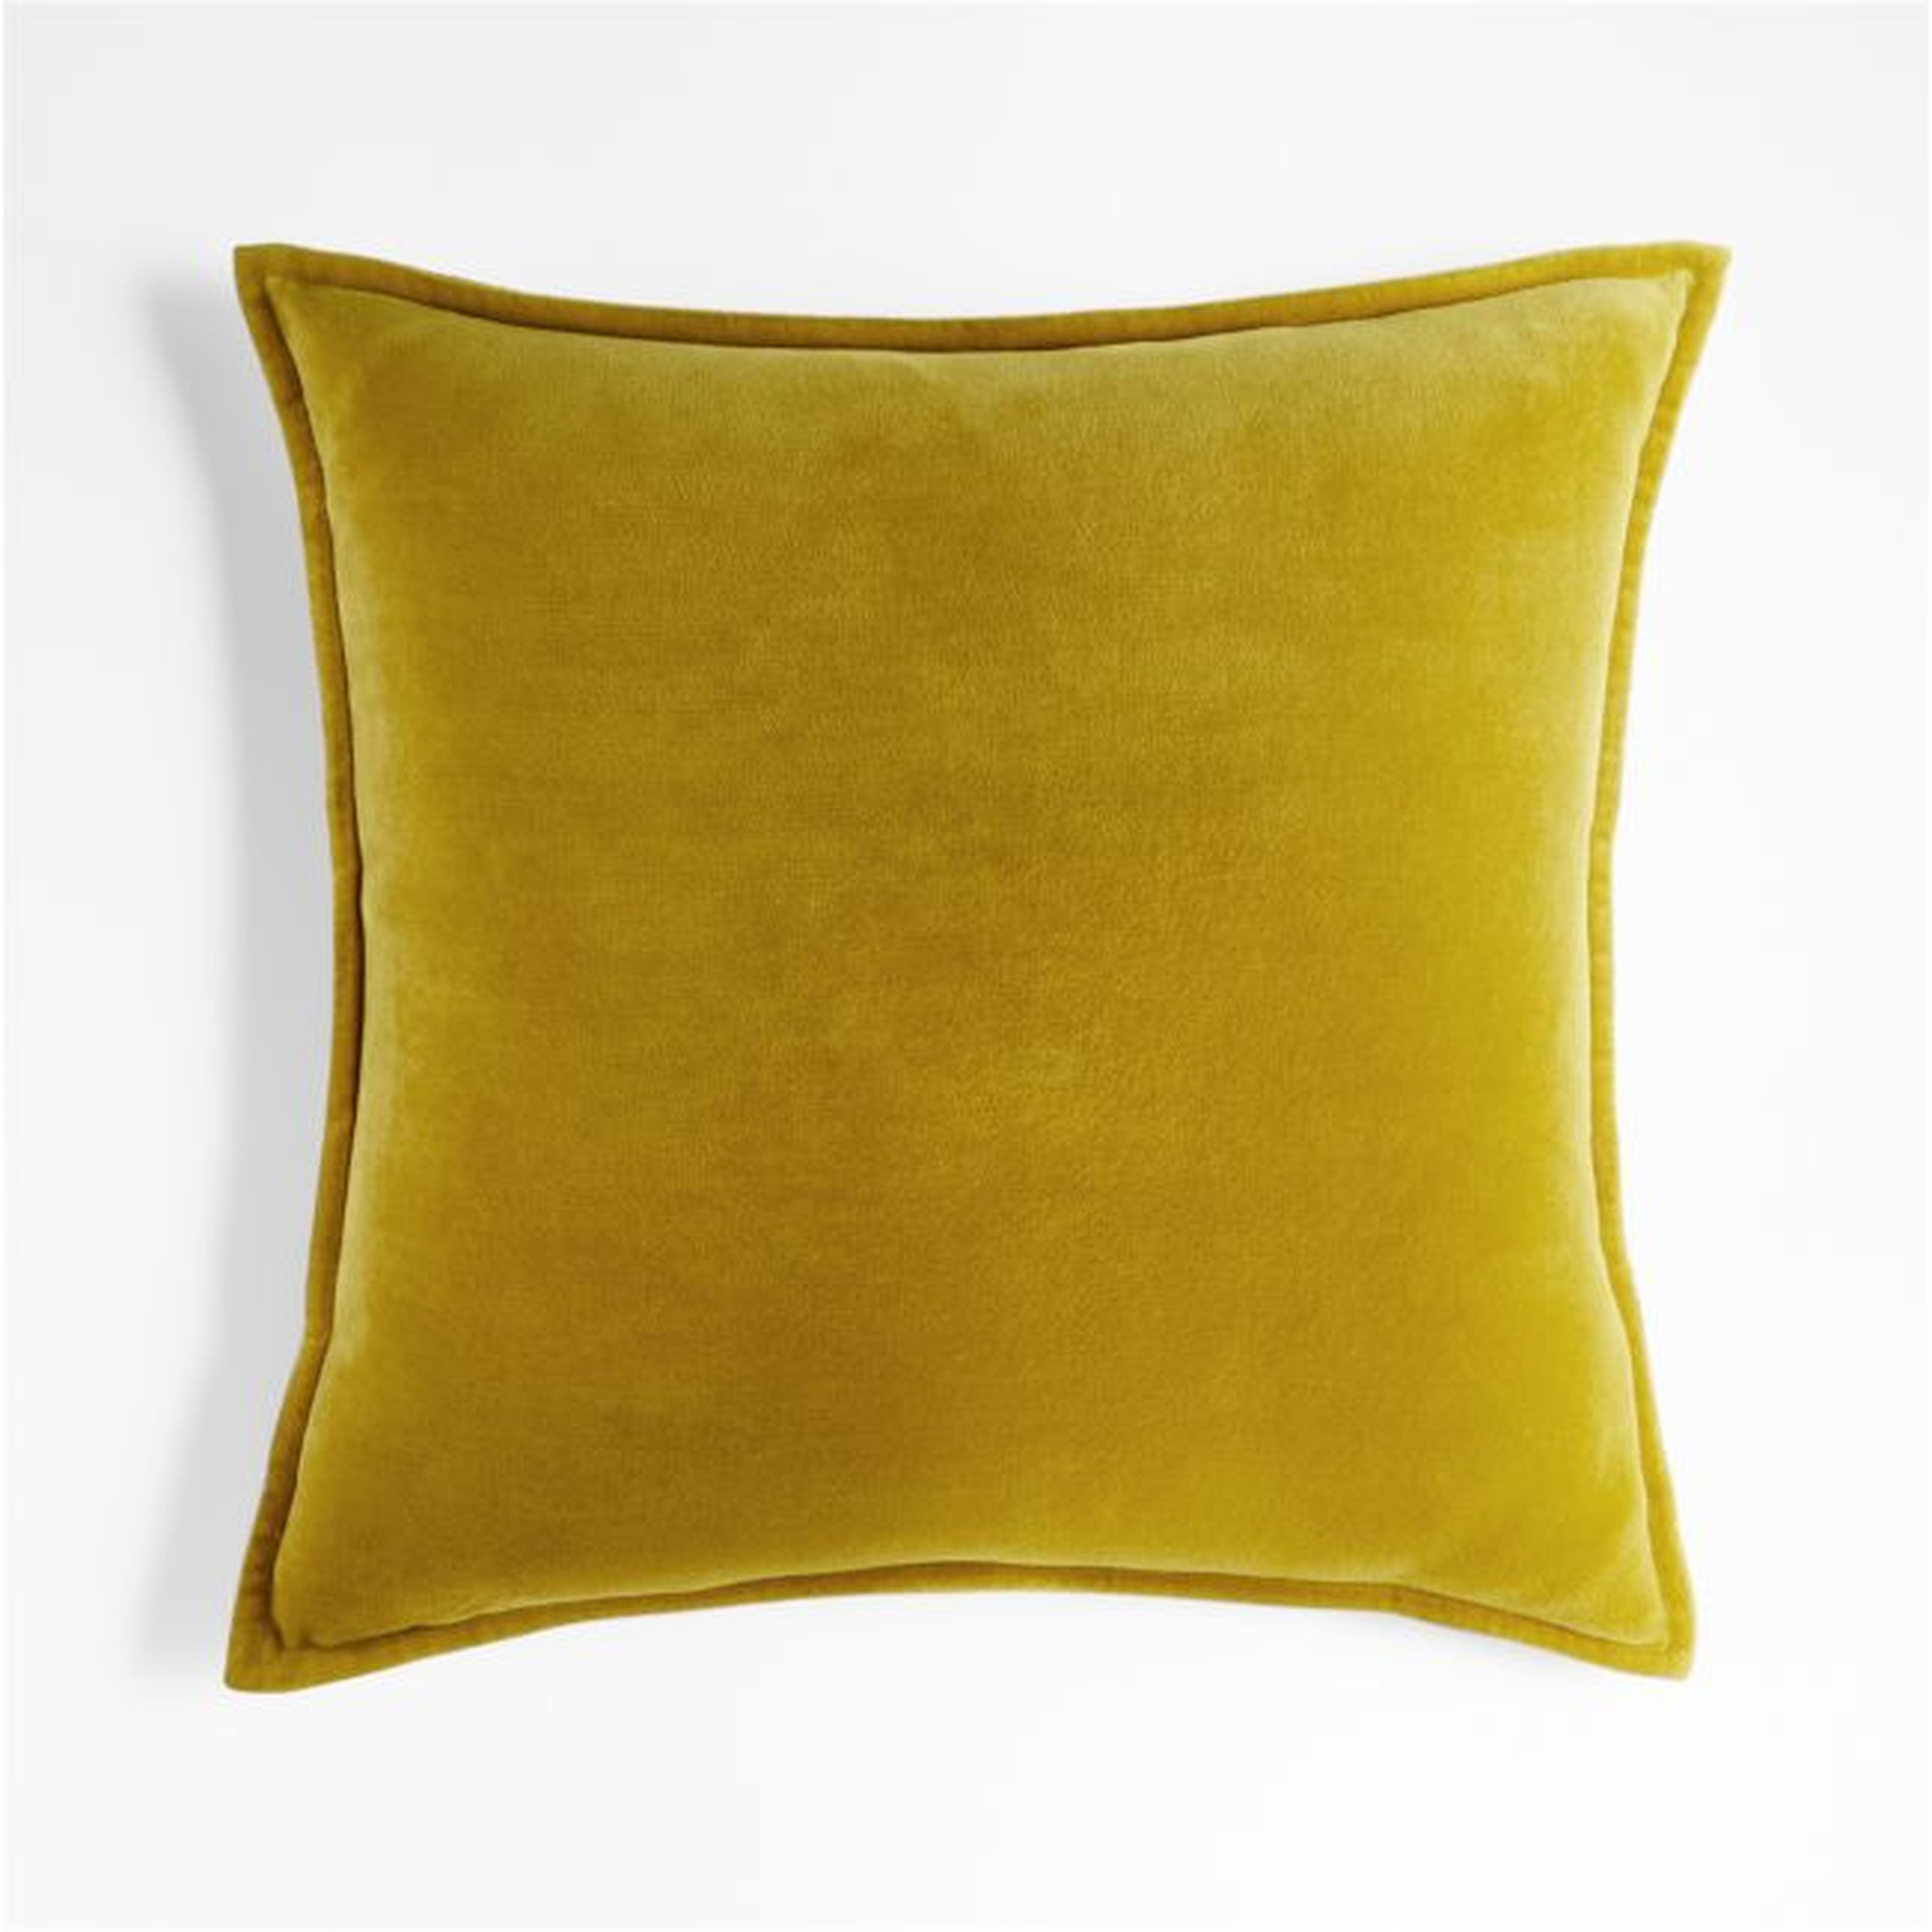 Ochre 20" Washed Cotton Velvet Pillow Cover with Feather-Down Insert - Crate and Barrel